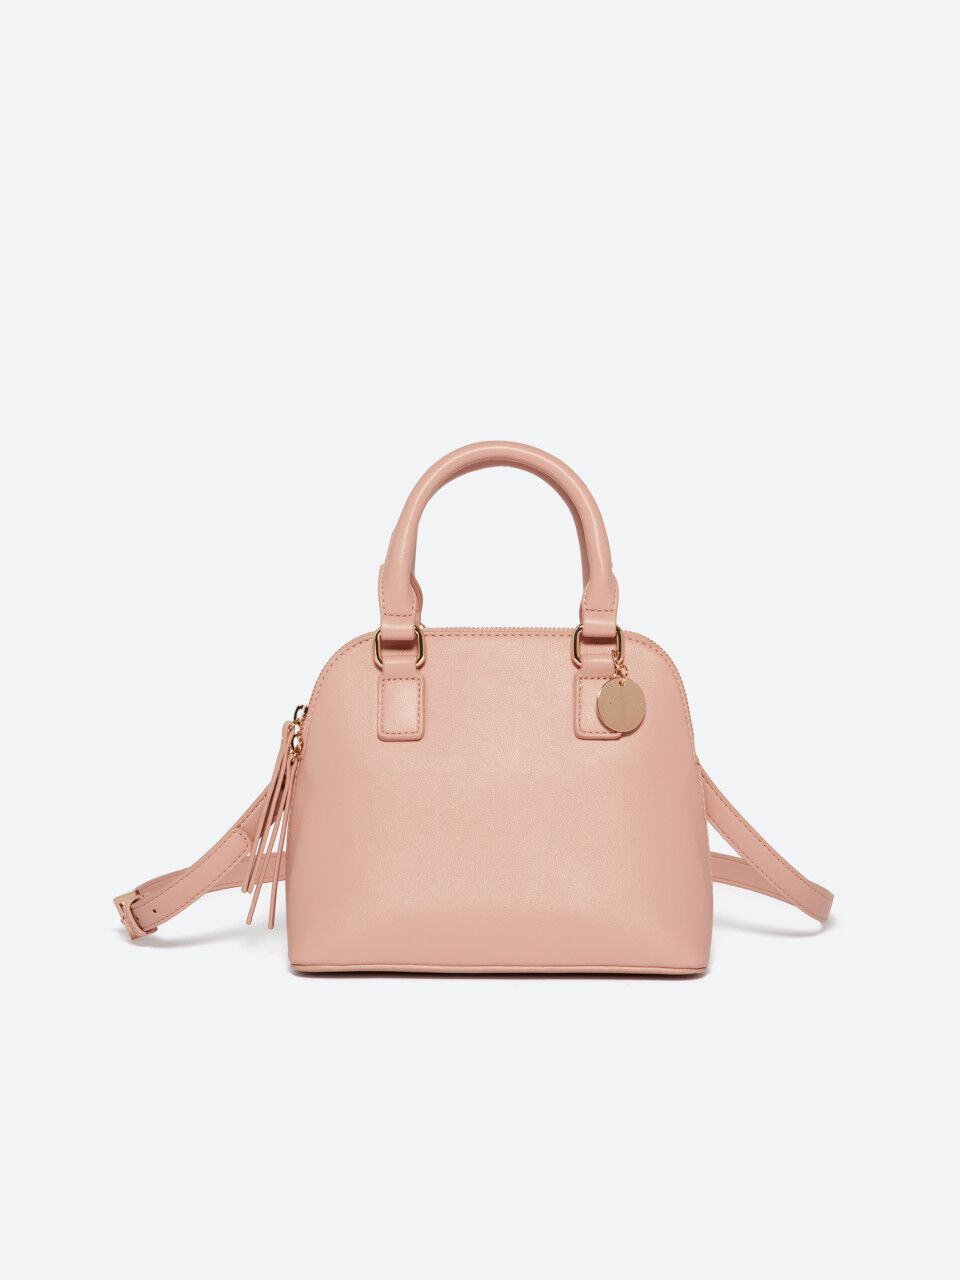 Colored bag with crossbody strap